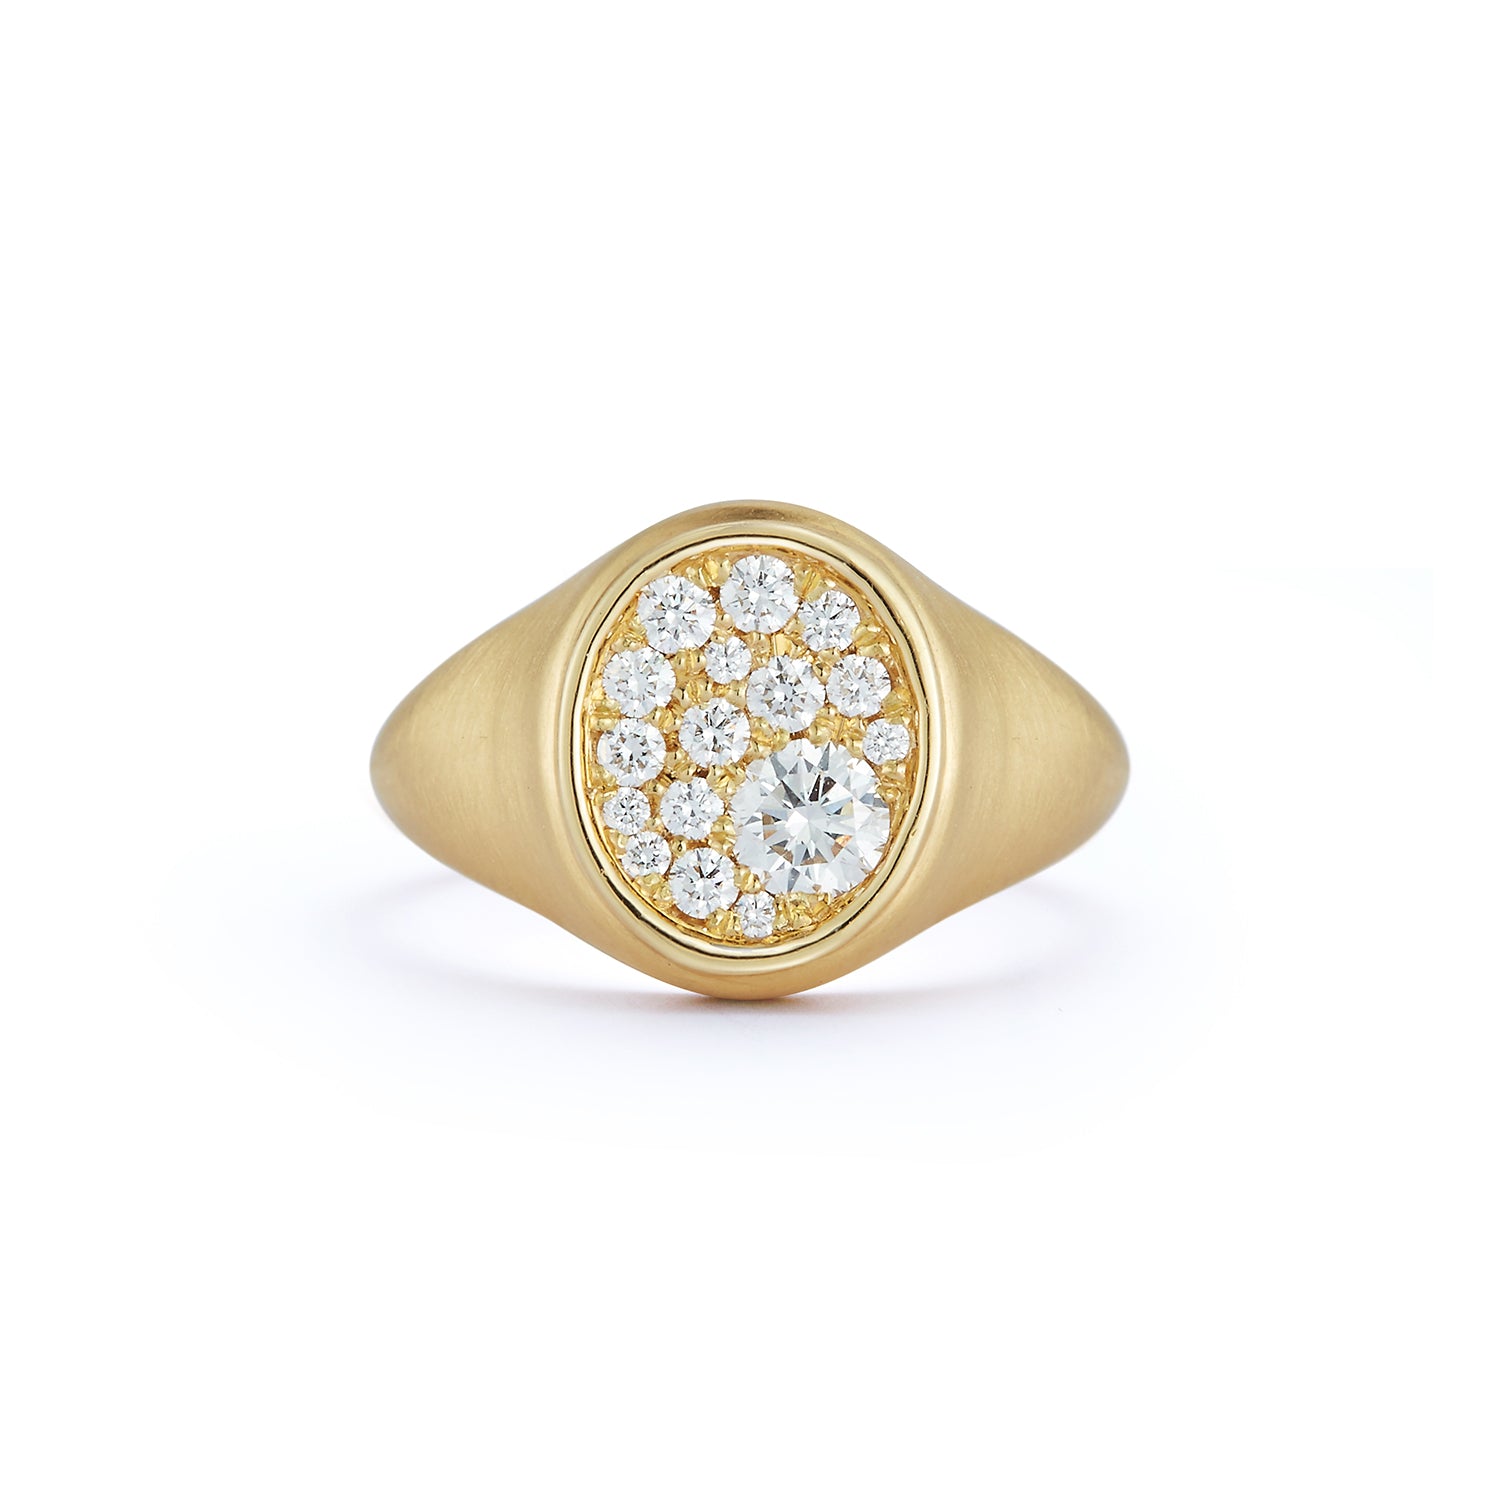 Pave Oval Signet in 18K Yellow Gold